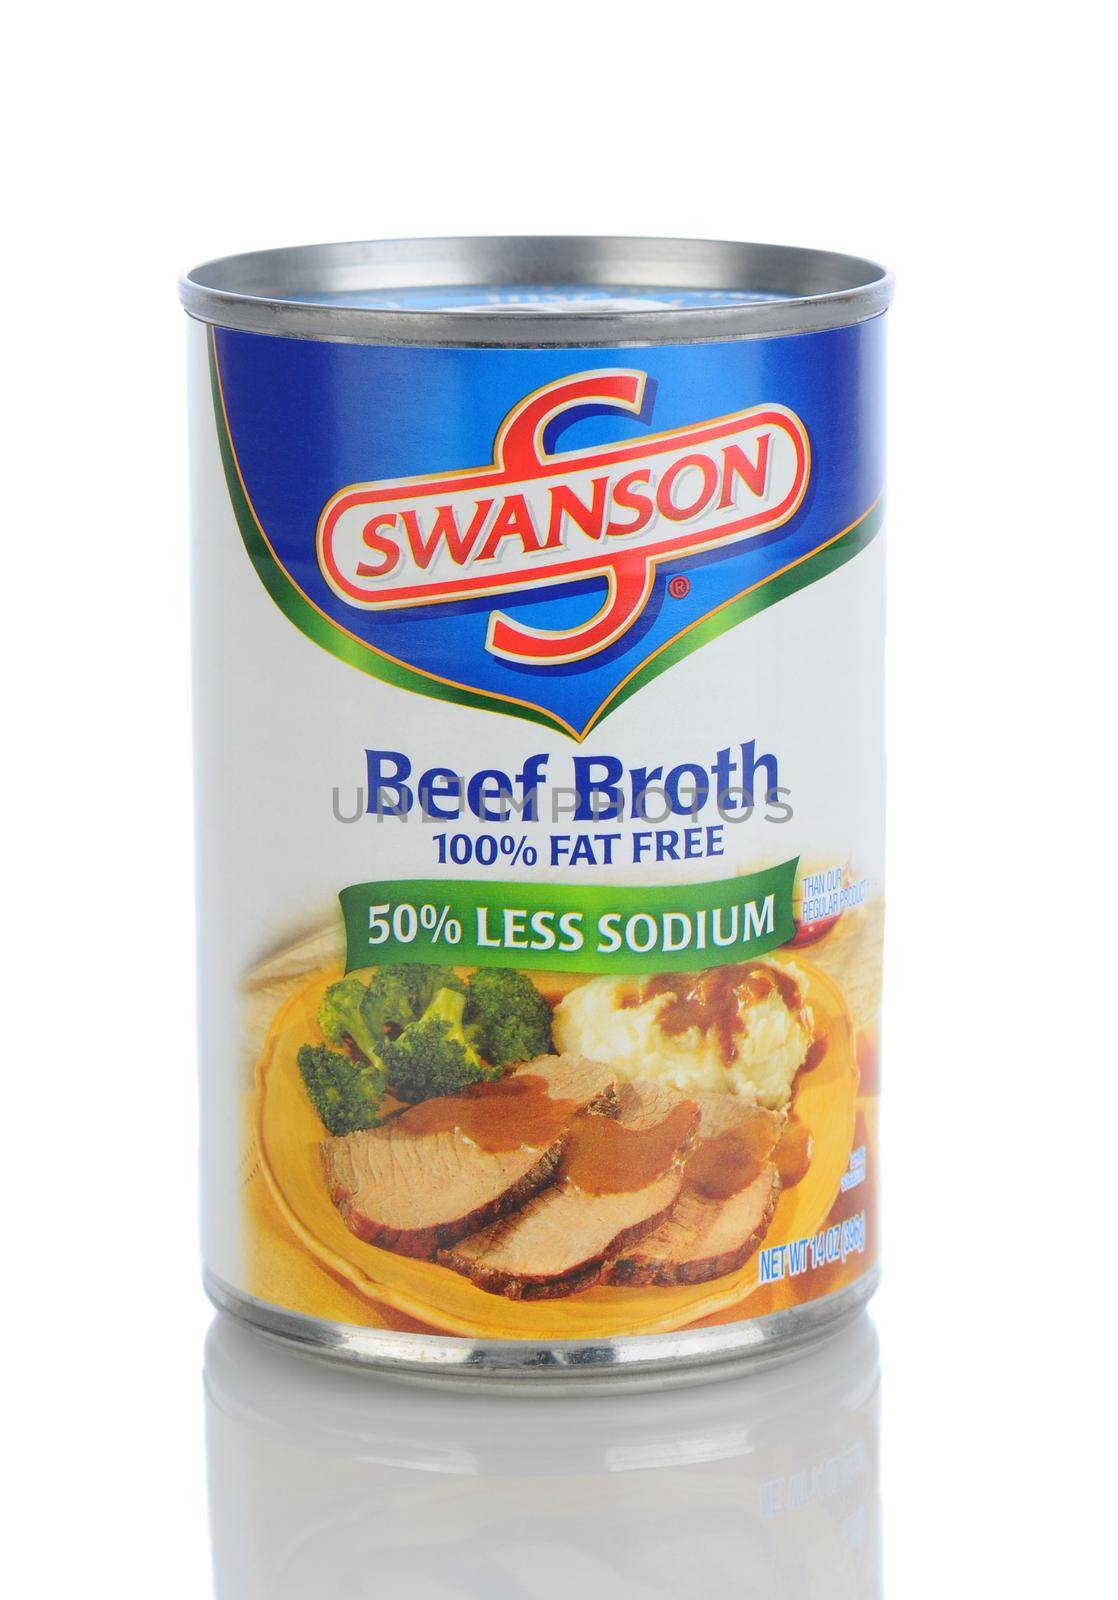 IRVINE, CA - January 11, 2013: A 1.5 ounce can of Swanson Beef Broth. Introuduced in the early 1900's the Swanson brand is currently owned by the Campbell Soup Conpany.